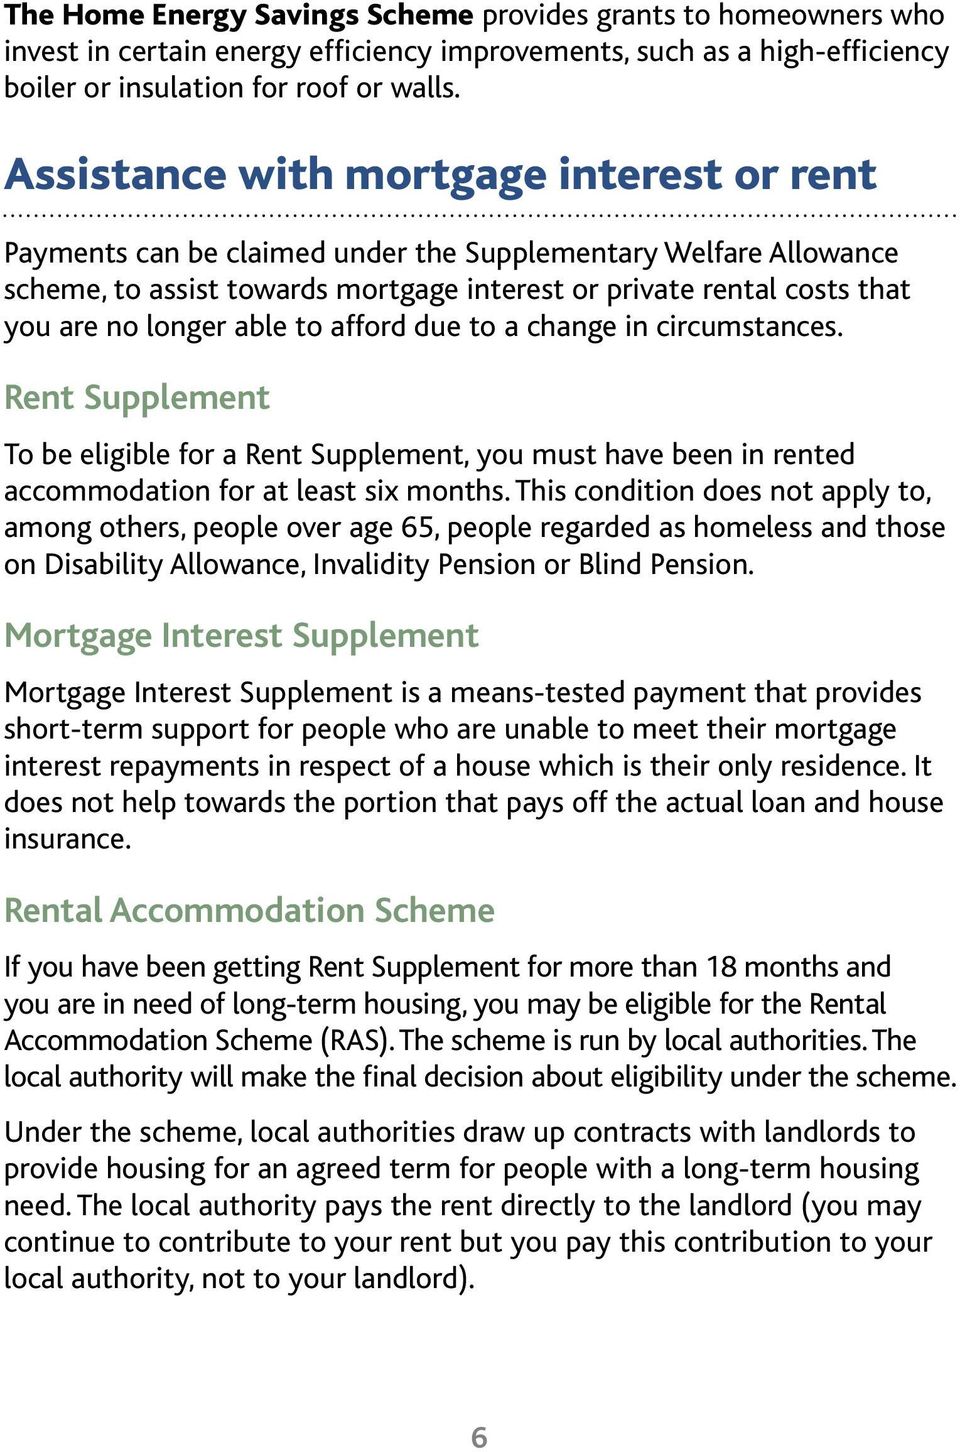 able to afford due to a change in circumstances. Rent Supplement To be eligible for a Rent Supplement, you must have been in rented accommodation for at least six months.